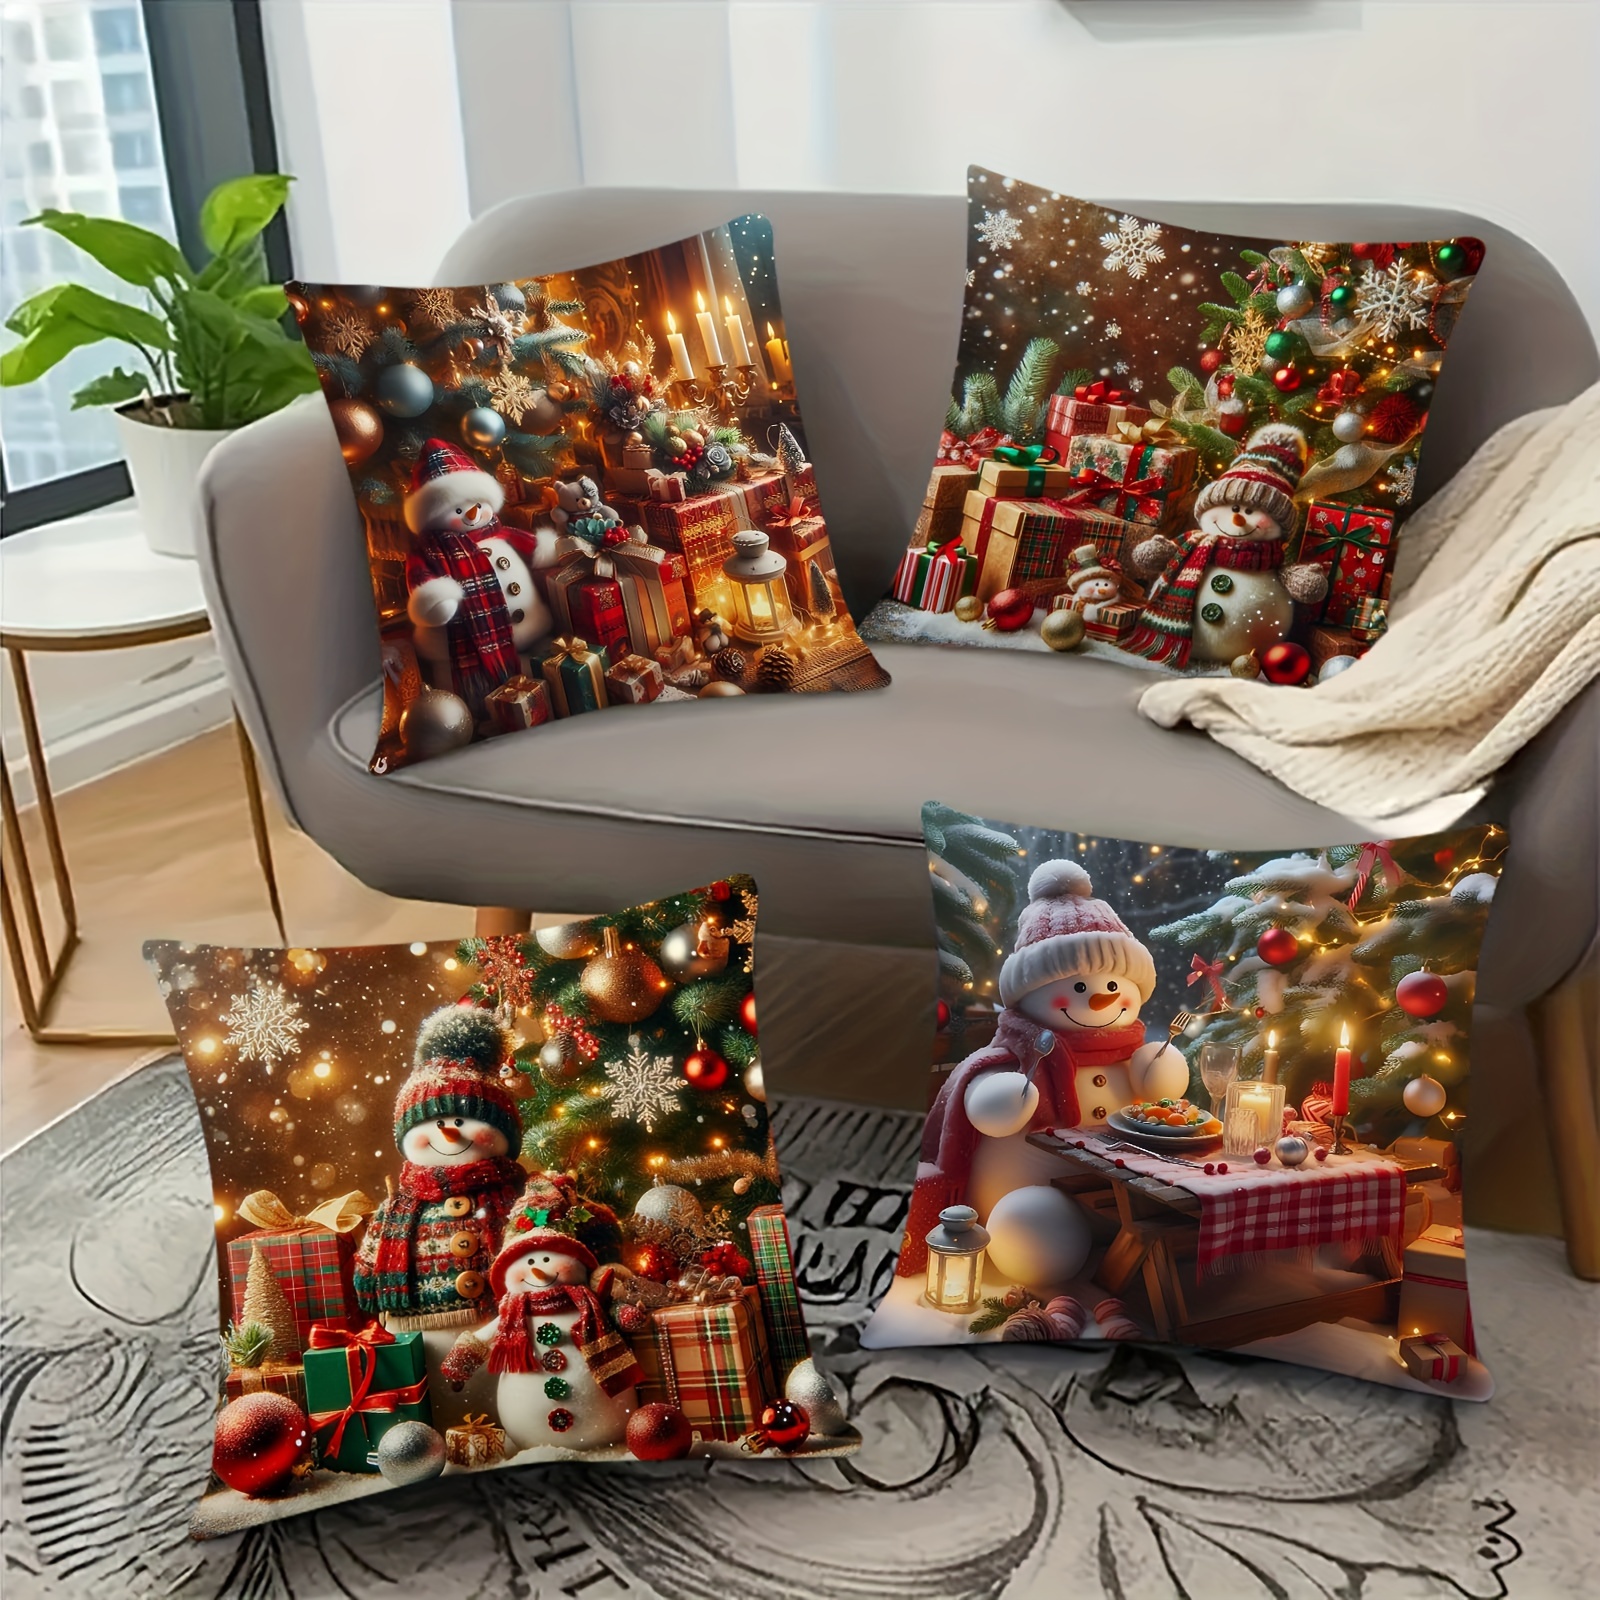 

4-piece Set Christmas Snowman & Ornament Throw Pillow Covers, 18x18 Inch - Soft Plush, Zip Closure, Machine Washable - Perfect For Sofa & Bedroom Decor